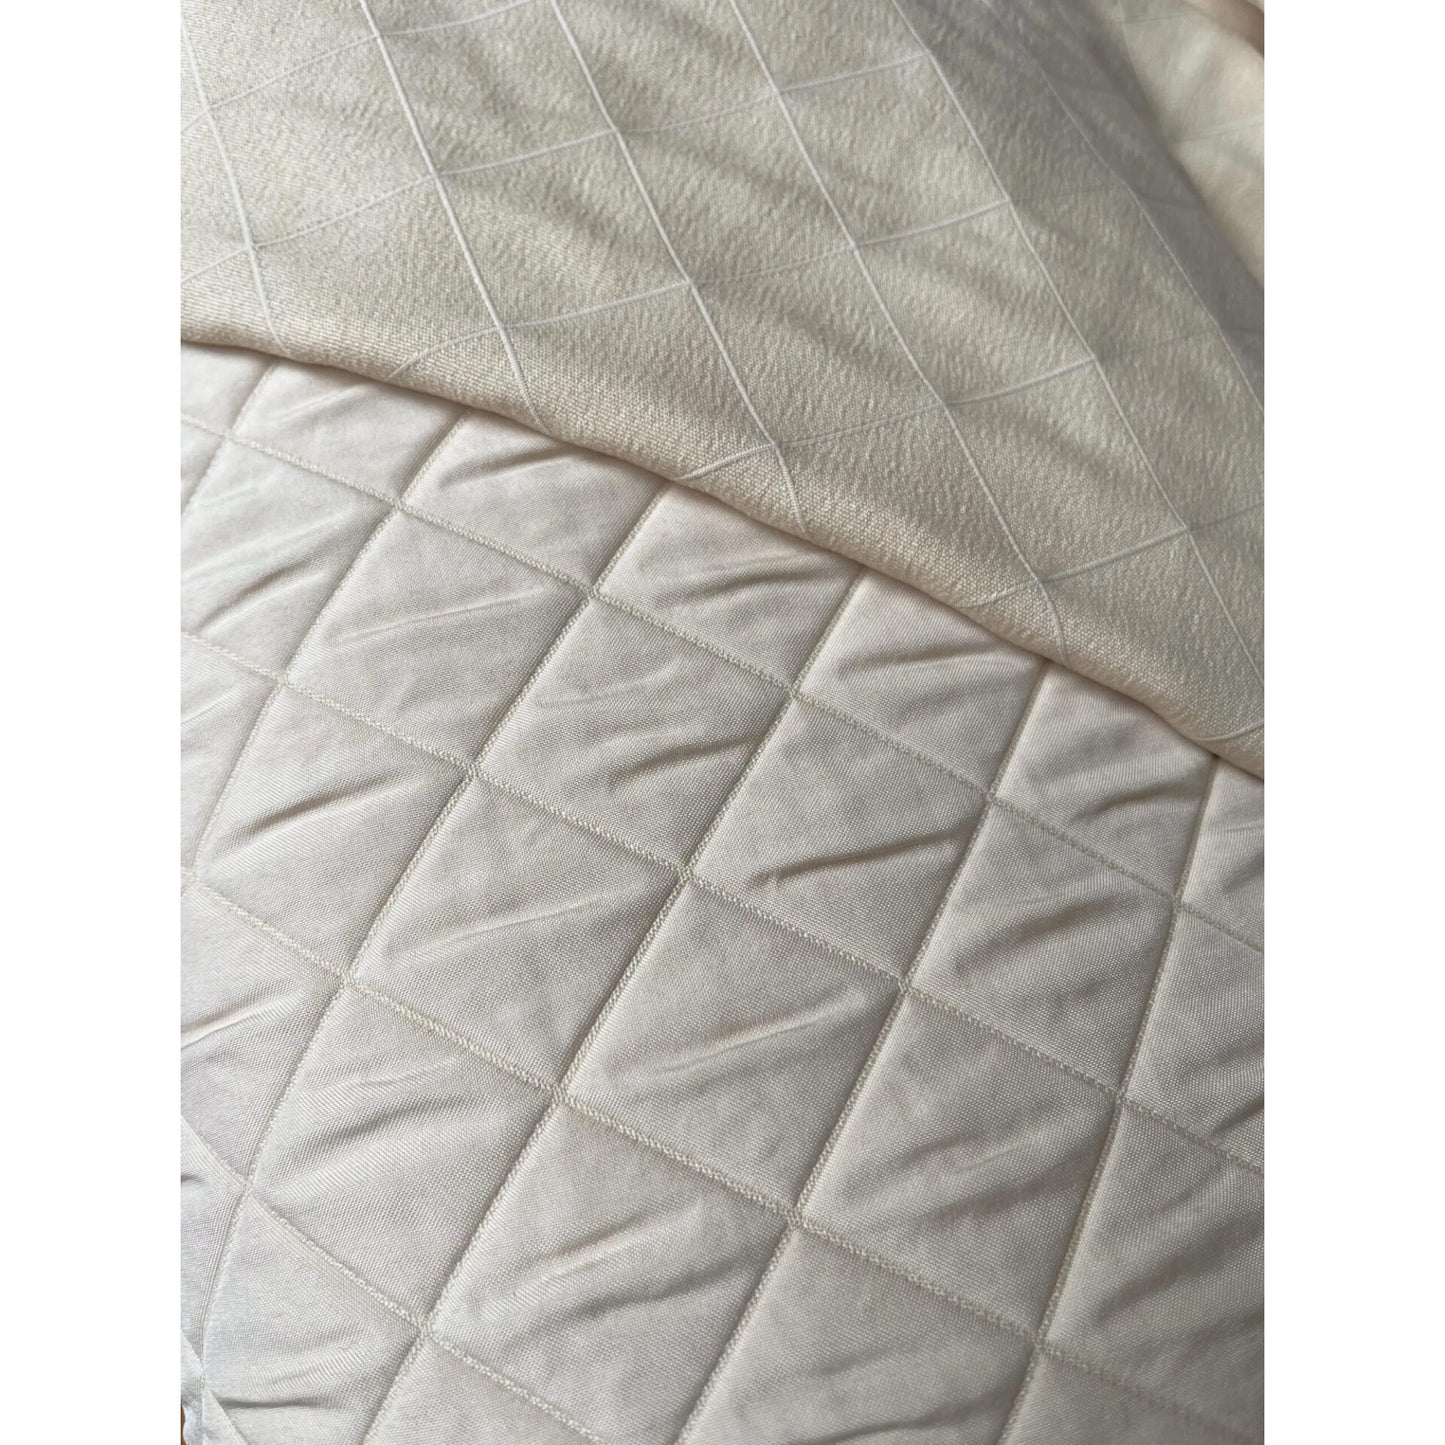 Quilted fabric - Ivory - FibreMood - The Final Stitch